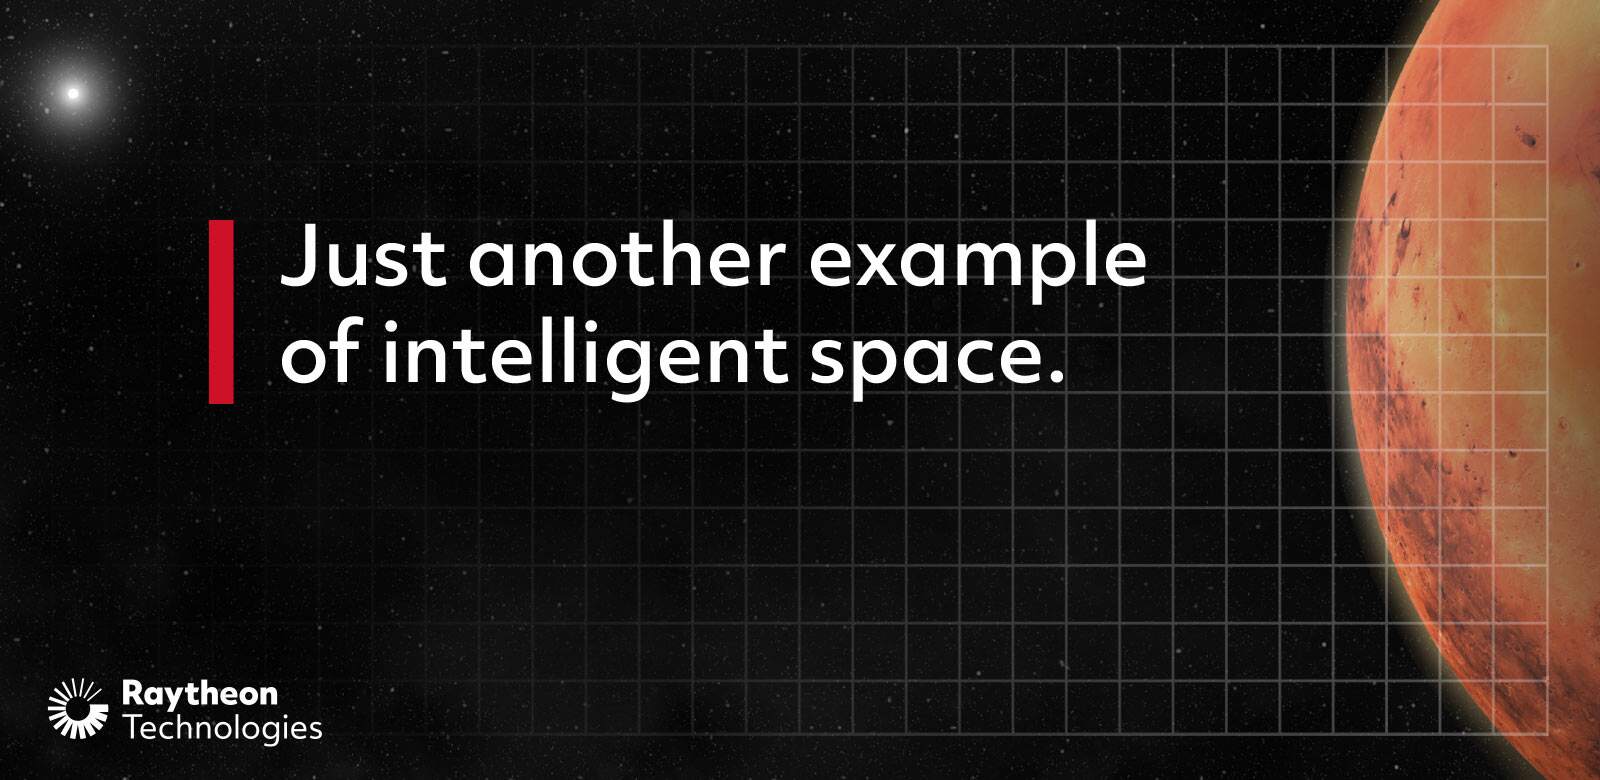 Just another example of intelligent space.